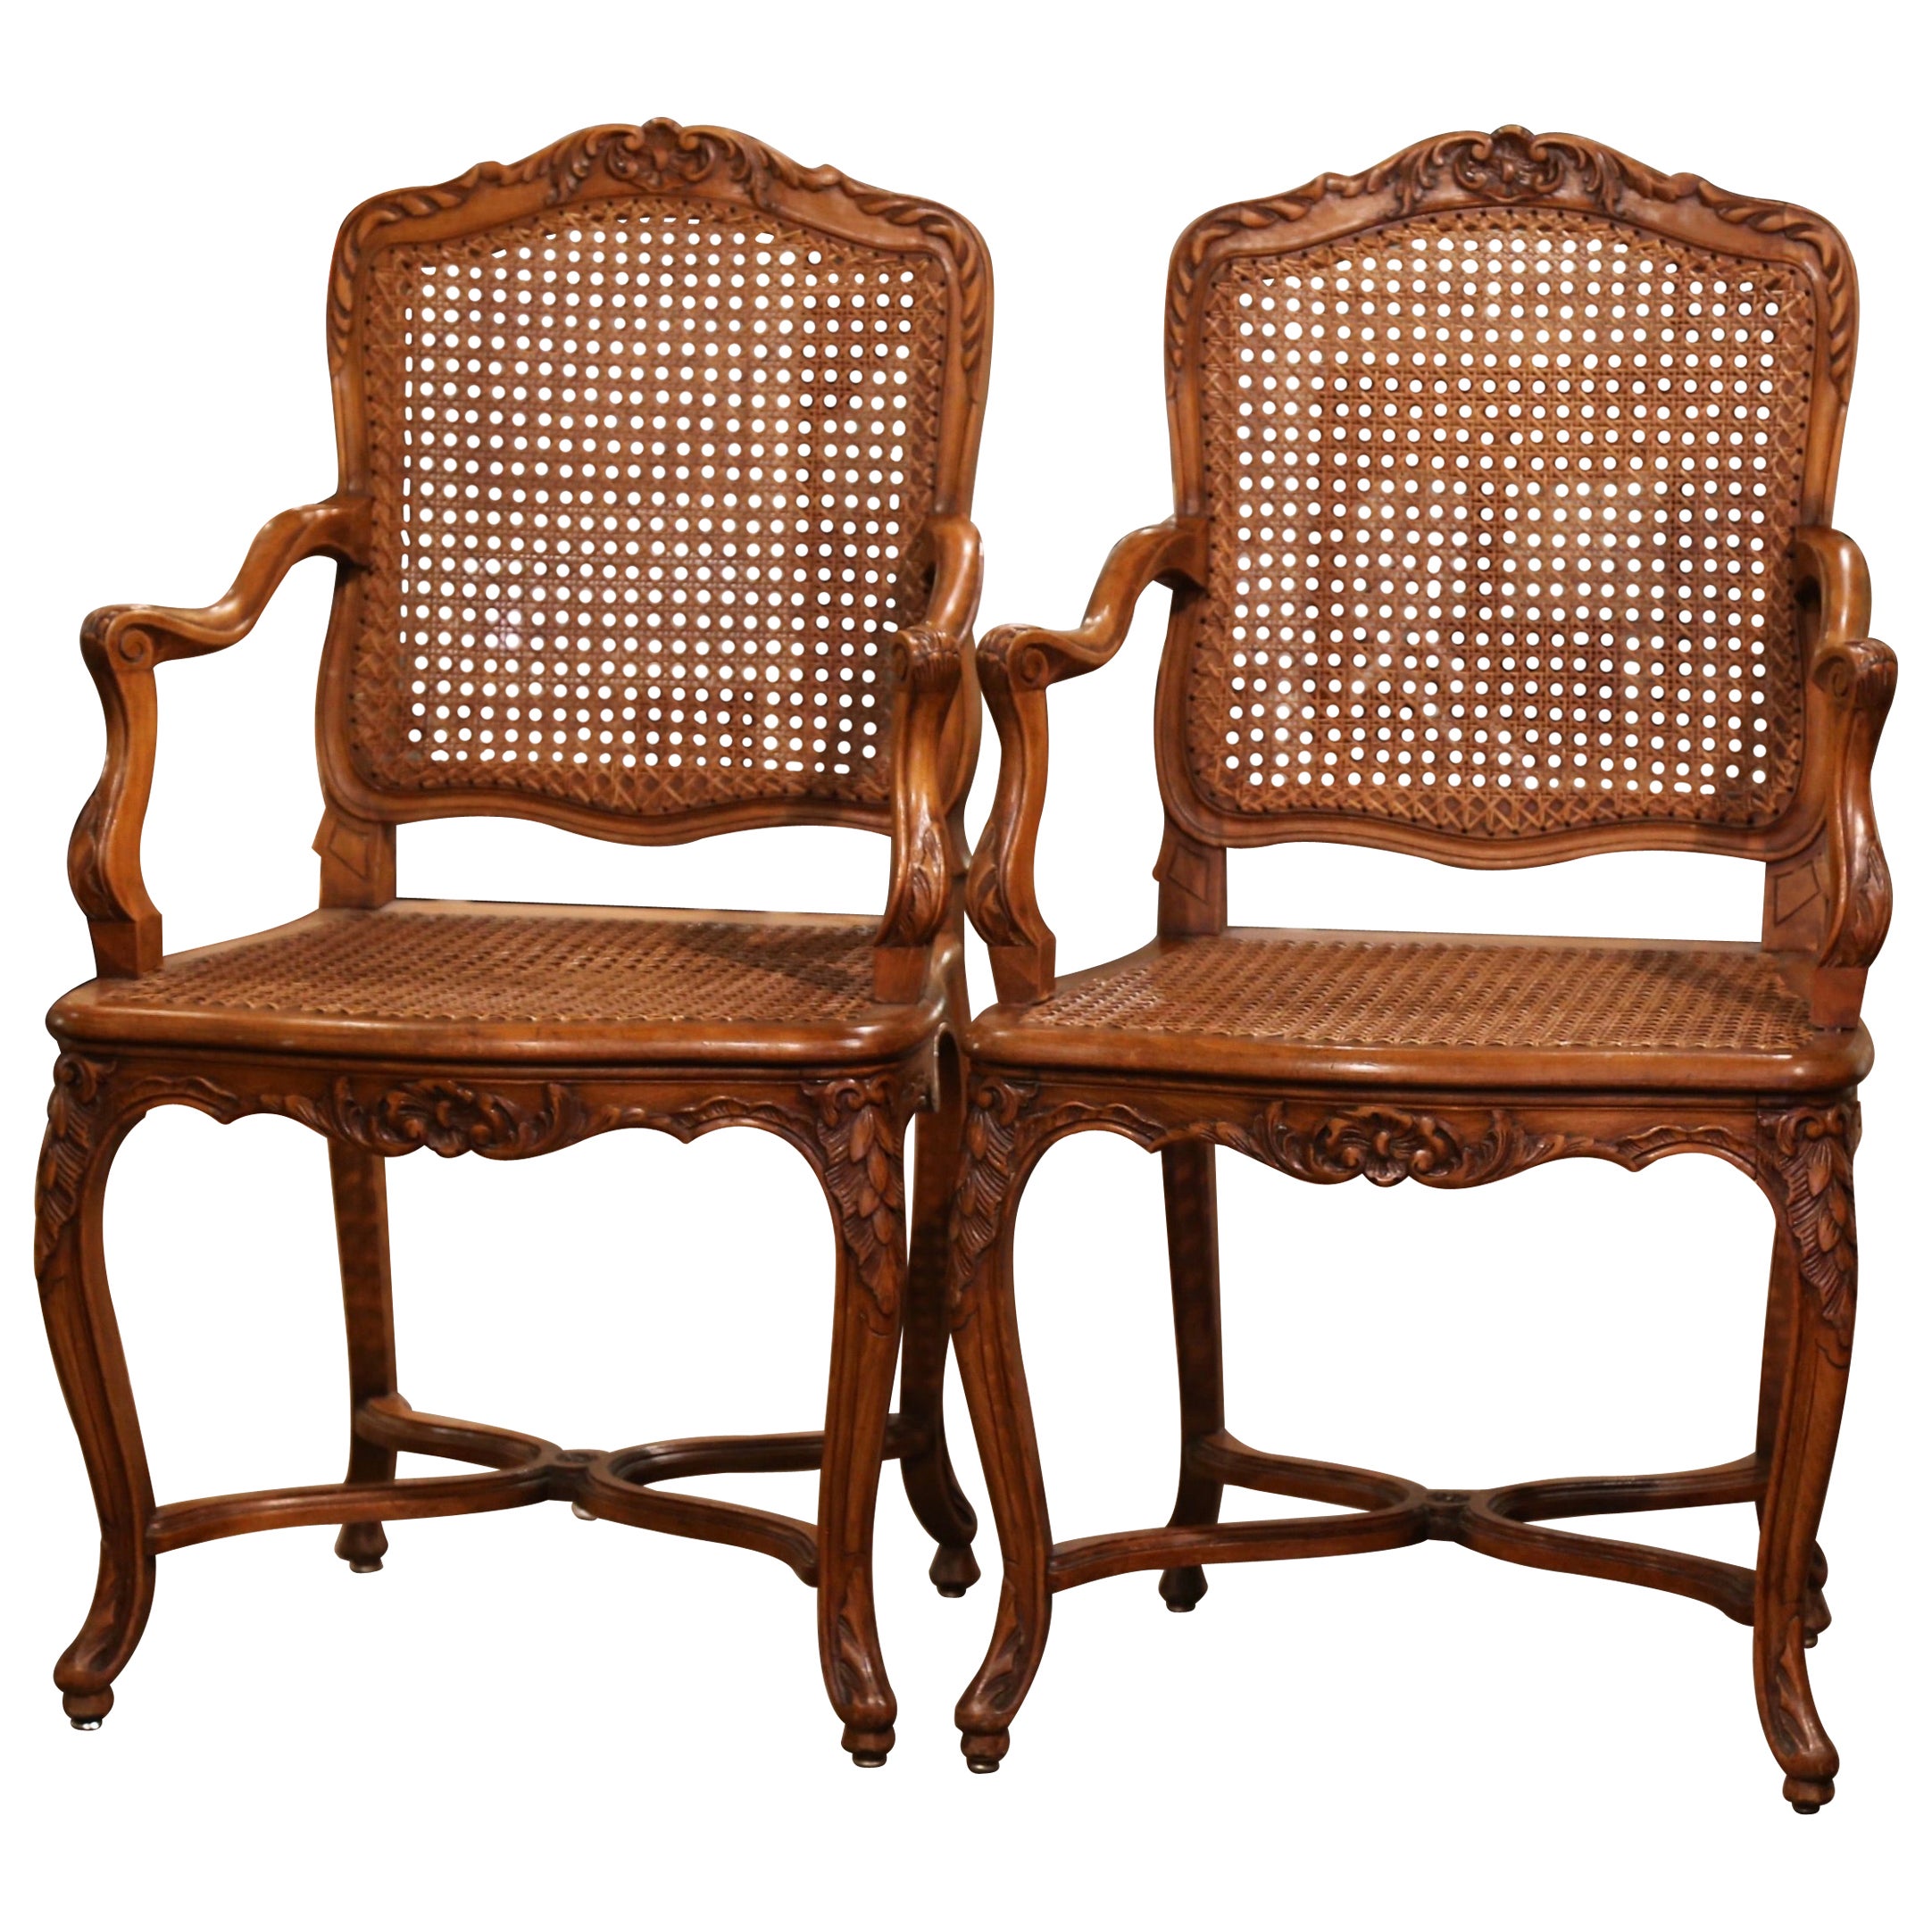 Pair of Early 20th Century French Louis XV Carved Walnut and Cane Armchairs